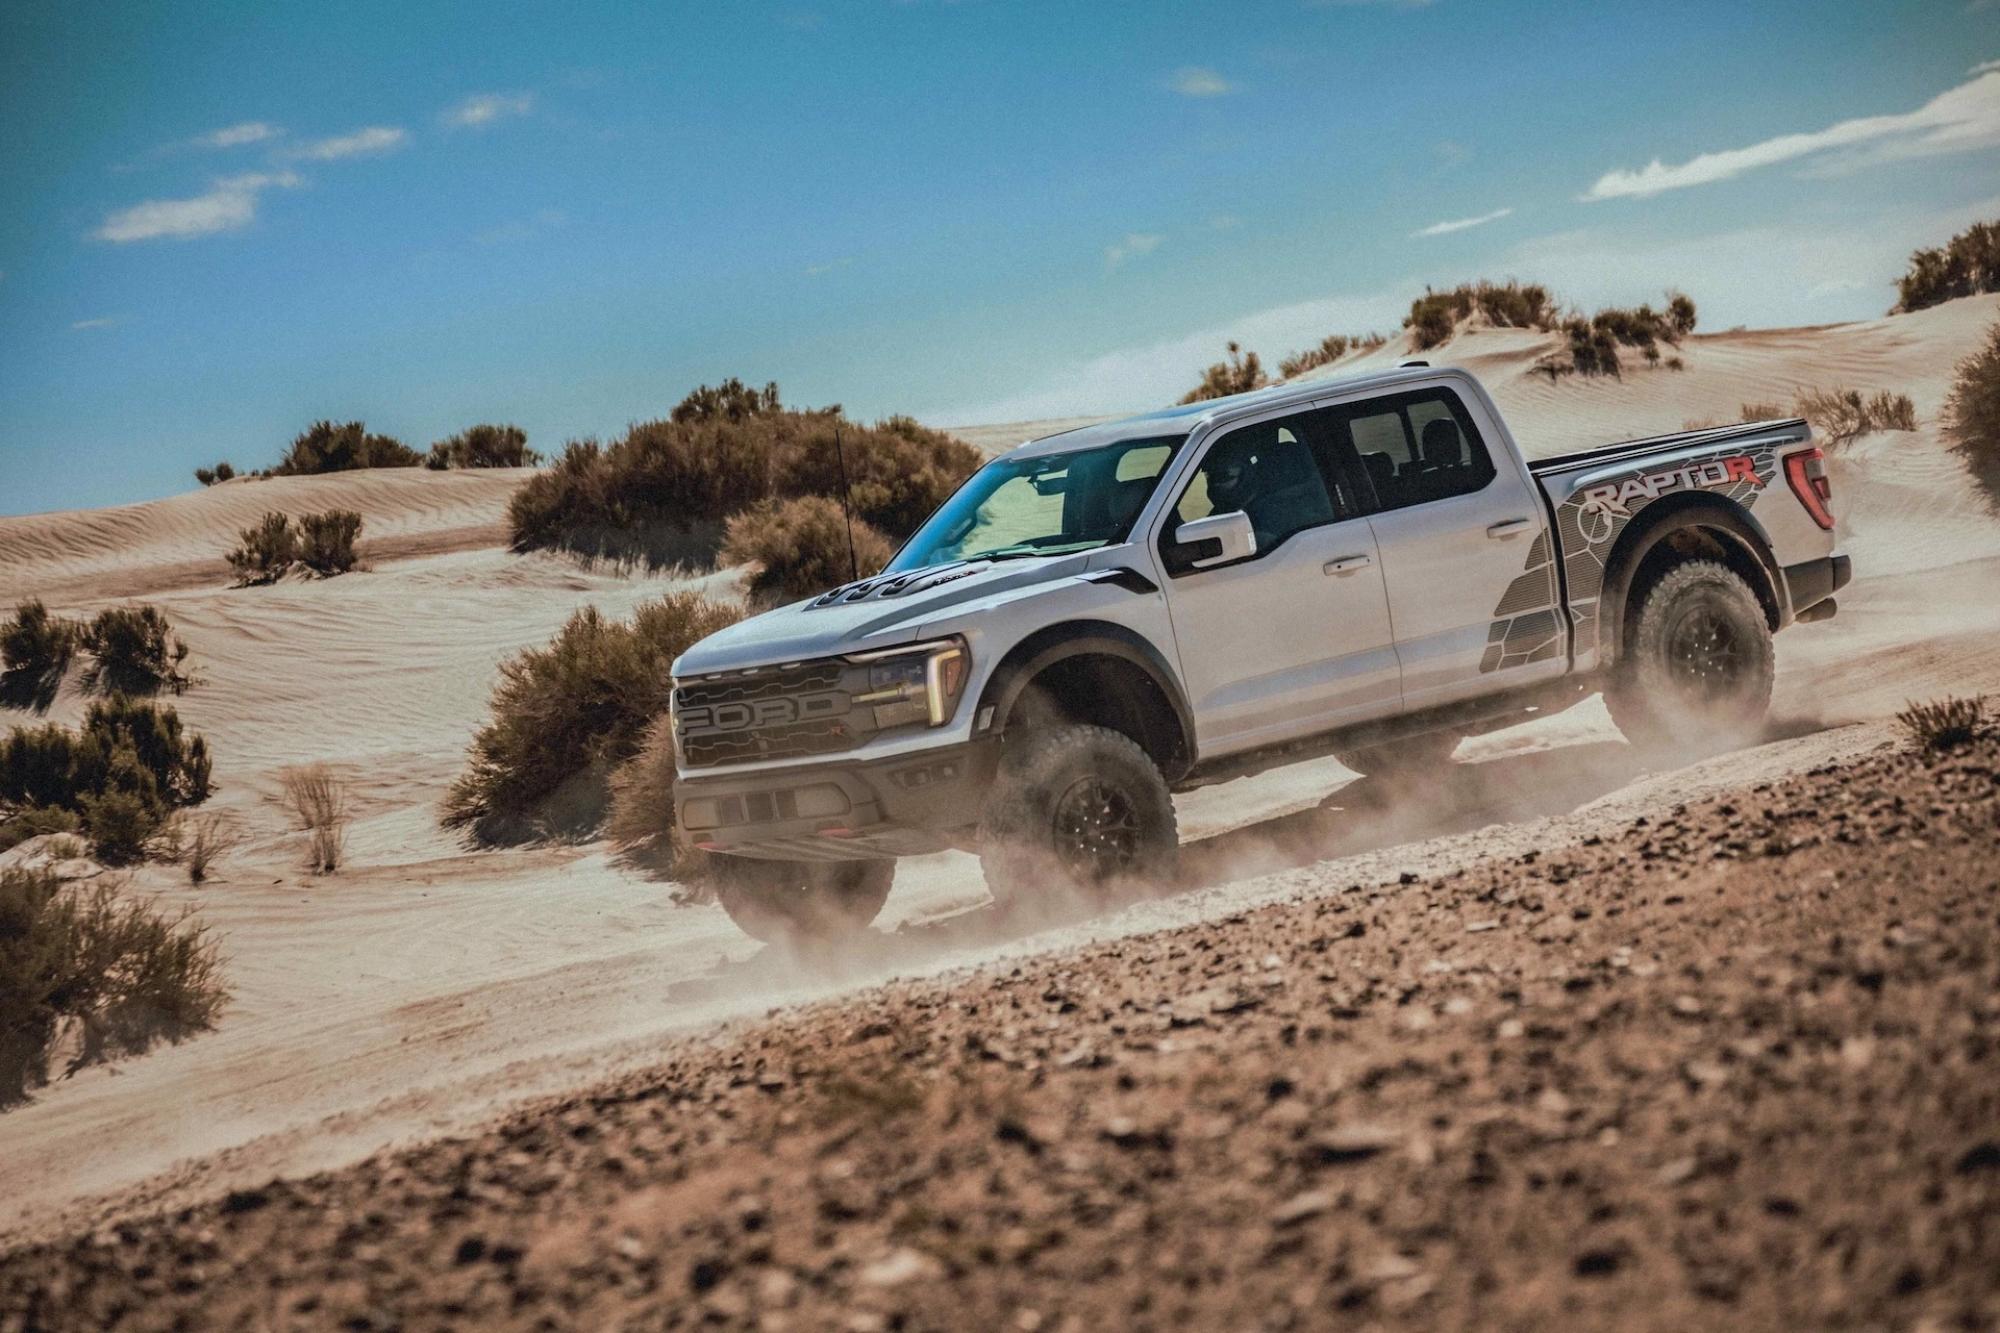 White Ford pickup truck with the Raptor label on the side on a desert environment